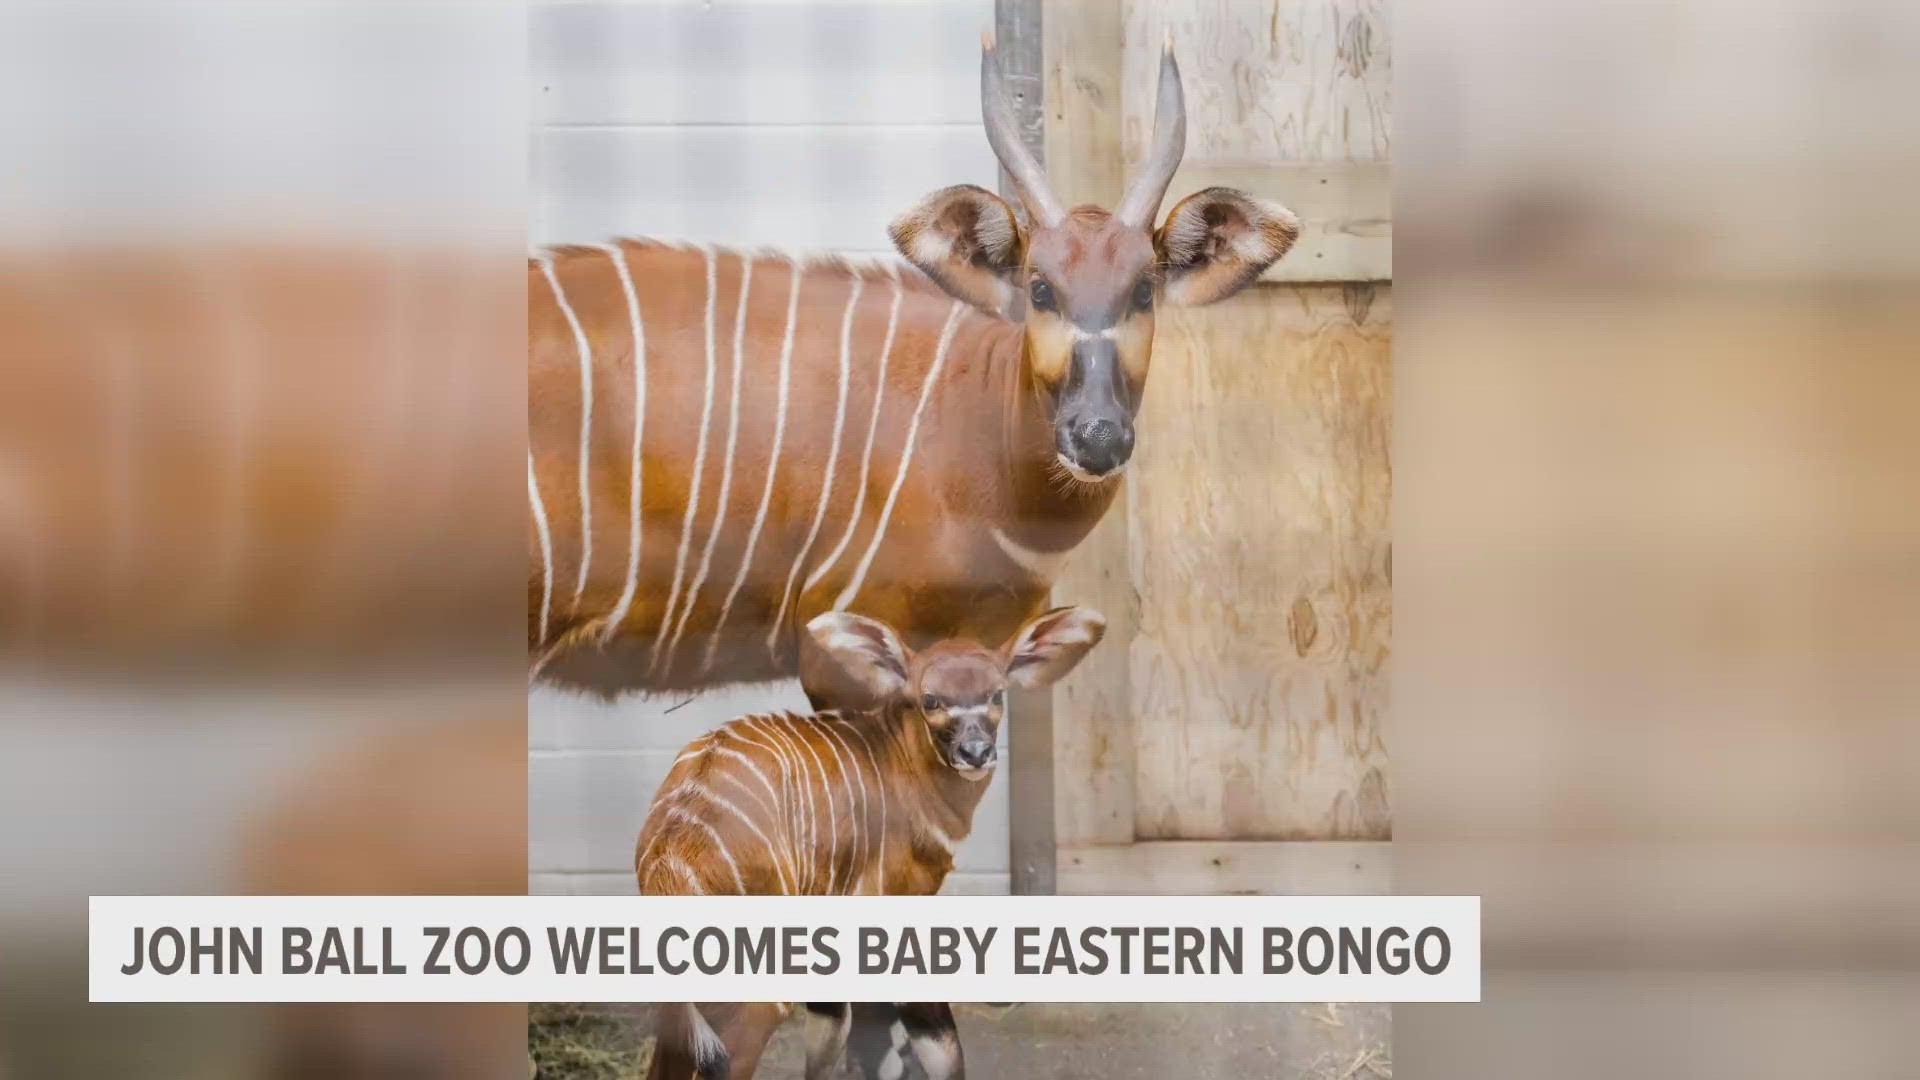 For now, the baby will be adjusting indoors with his mother, Carrot, and the zoo's other female eastern bongo, Penny.